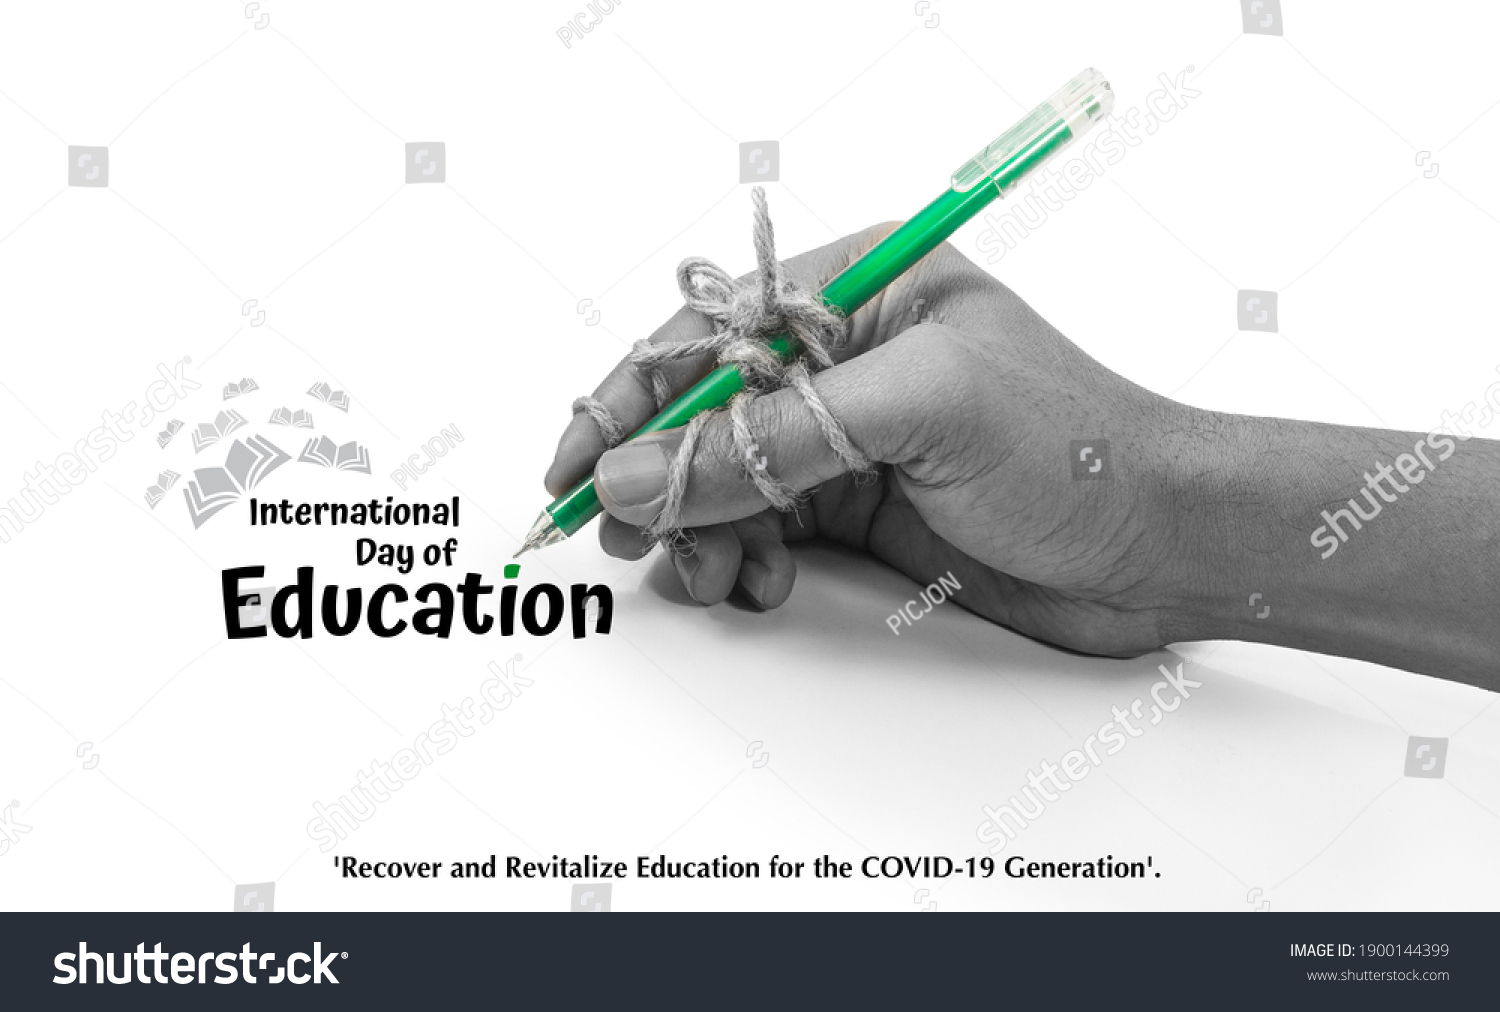 pen tightly knotted with hand. creative card idea for study, Perseverance, diligence, persistence, International Education Day, 24 January, Recover and revitalize education for the COVID 19 generation #1900144399